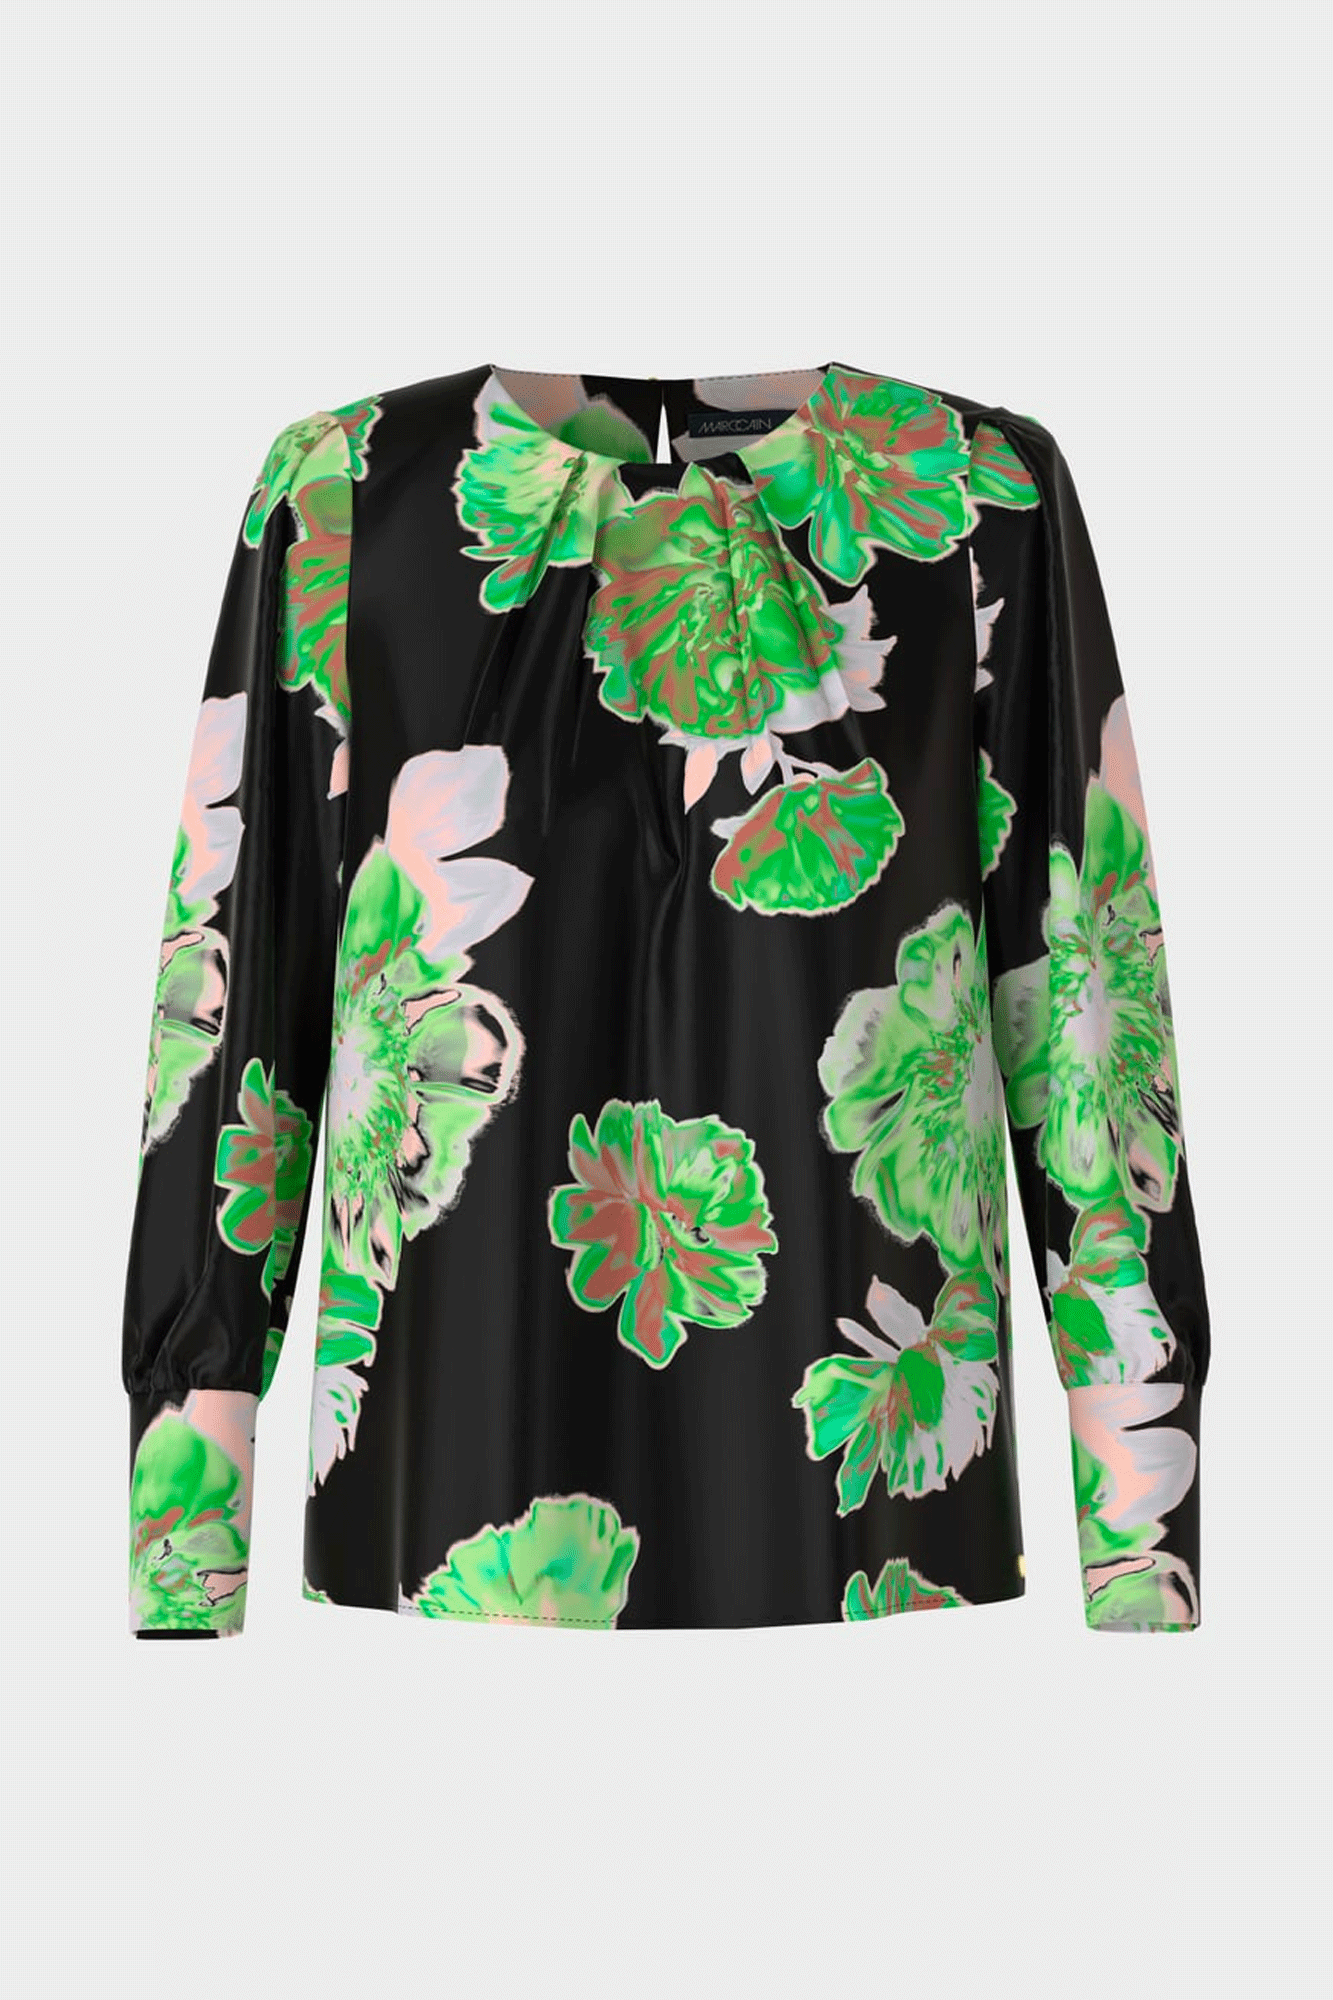 This delicate Floral Long Sleeve Blouse is a perfect pick for an elegant look. Crafted from lightweight and breathable viscose, it features a romantic floral print and pleated scoop neckline with a button fastener.